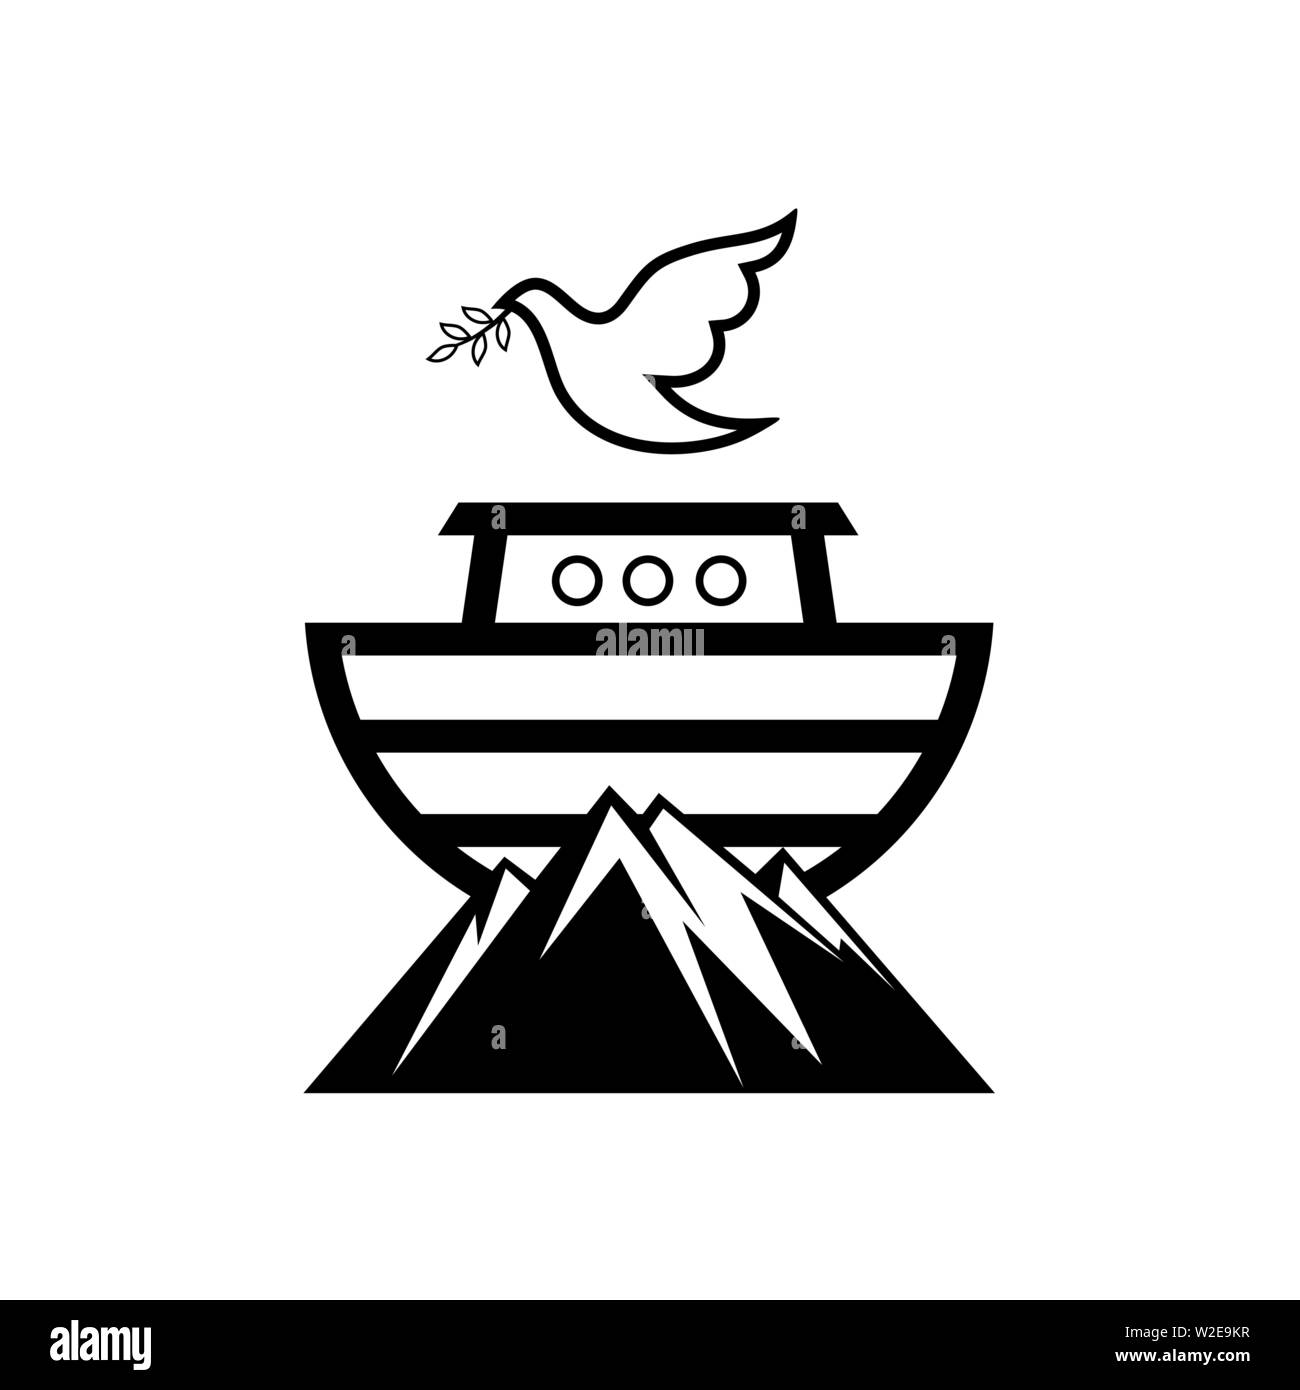 Logo Noah's ark on top of the mountain. Dove with a branch of olive. Ship to rescue animals and people from the Flood. Biblical illustration. Stock Vector